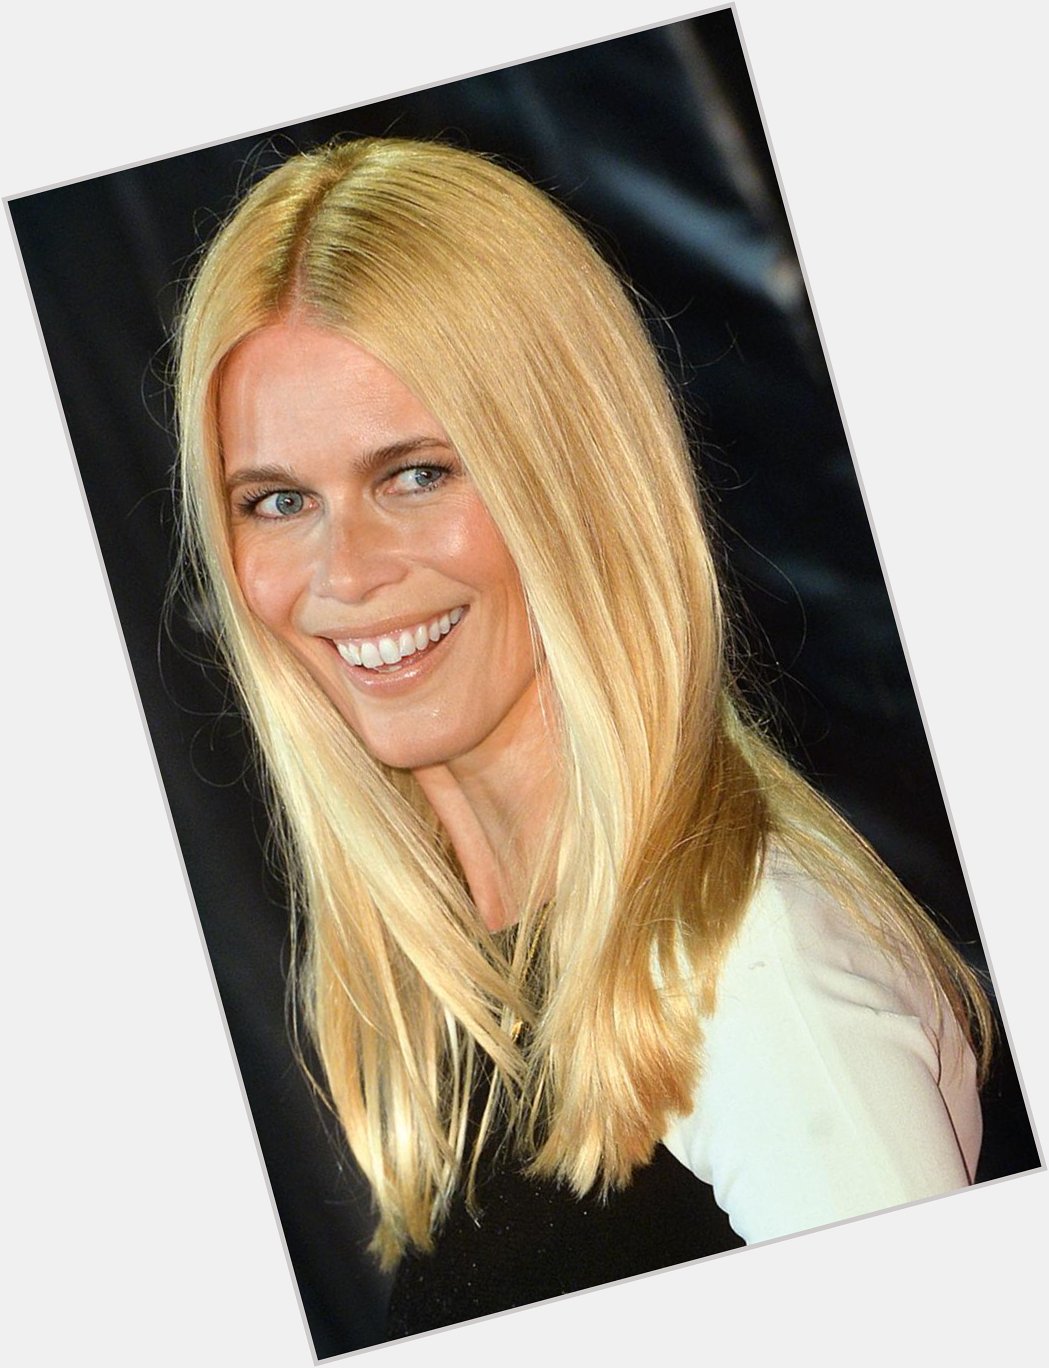 WIshing a happy 45th birthday to Claudia Schiffer! Here\s what she packs in her beauty kit
 